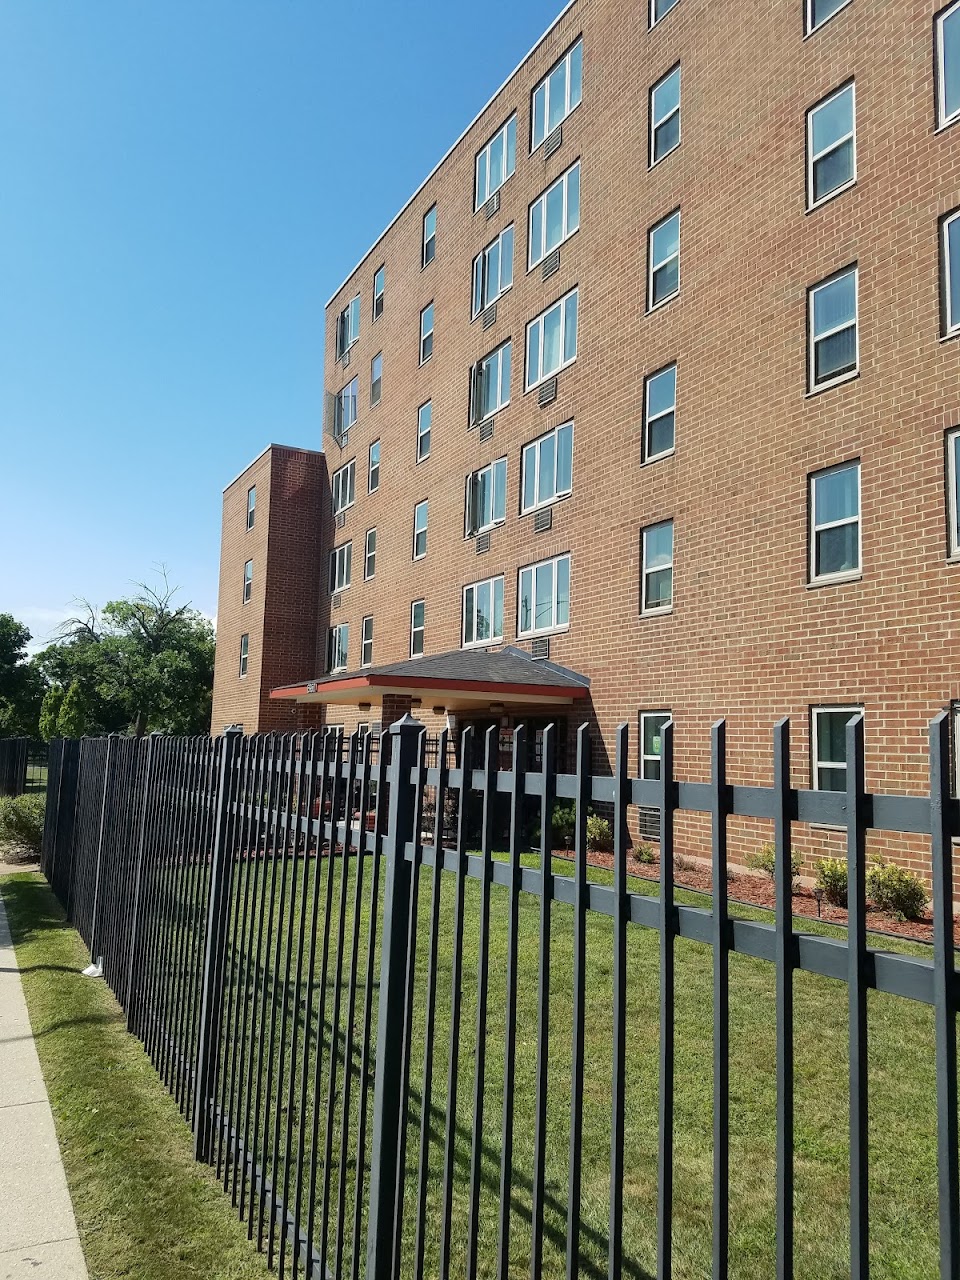 Photo of LAFAYETTE TERRACE APARTMENTS at 6956 S VINCENNES AVE CHICAGO, IL 60621